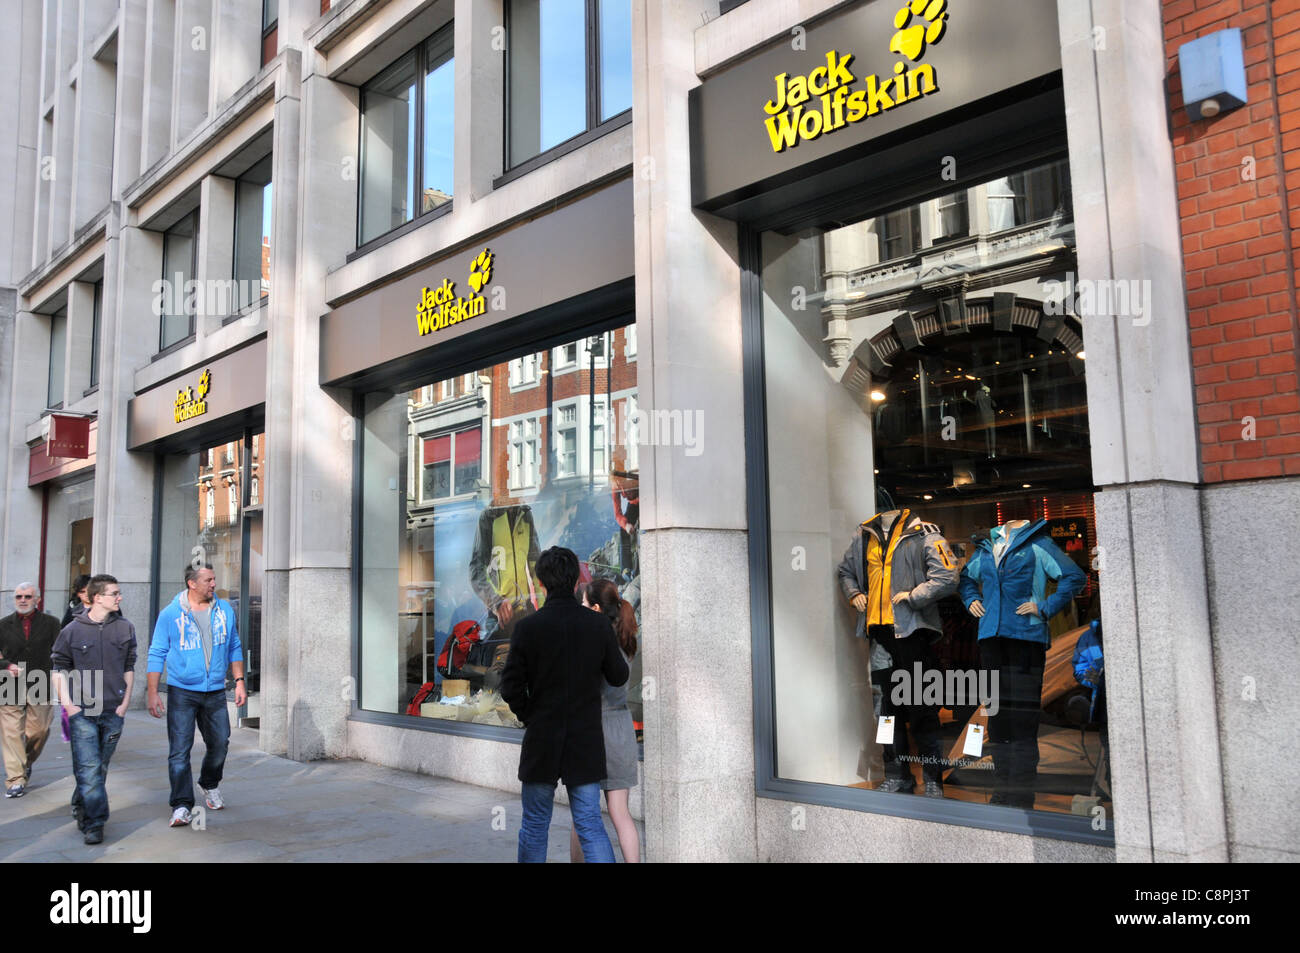 Jack Wolfskin store shop outdoor wear clothes Long Acre Covent Garden London  Stock Photo - Alamy